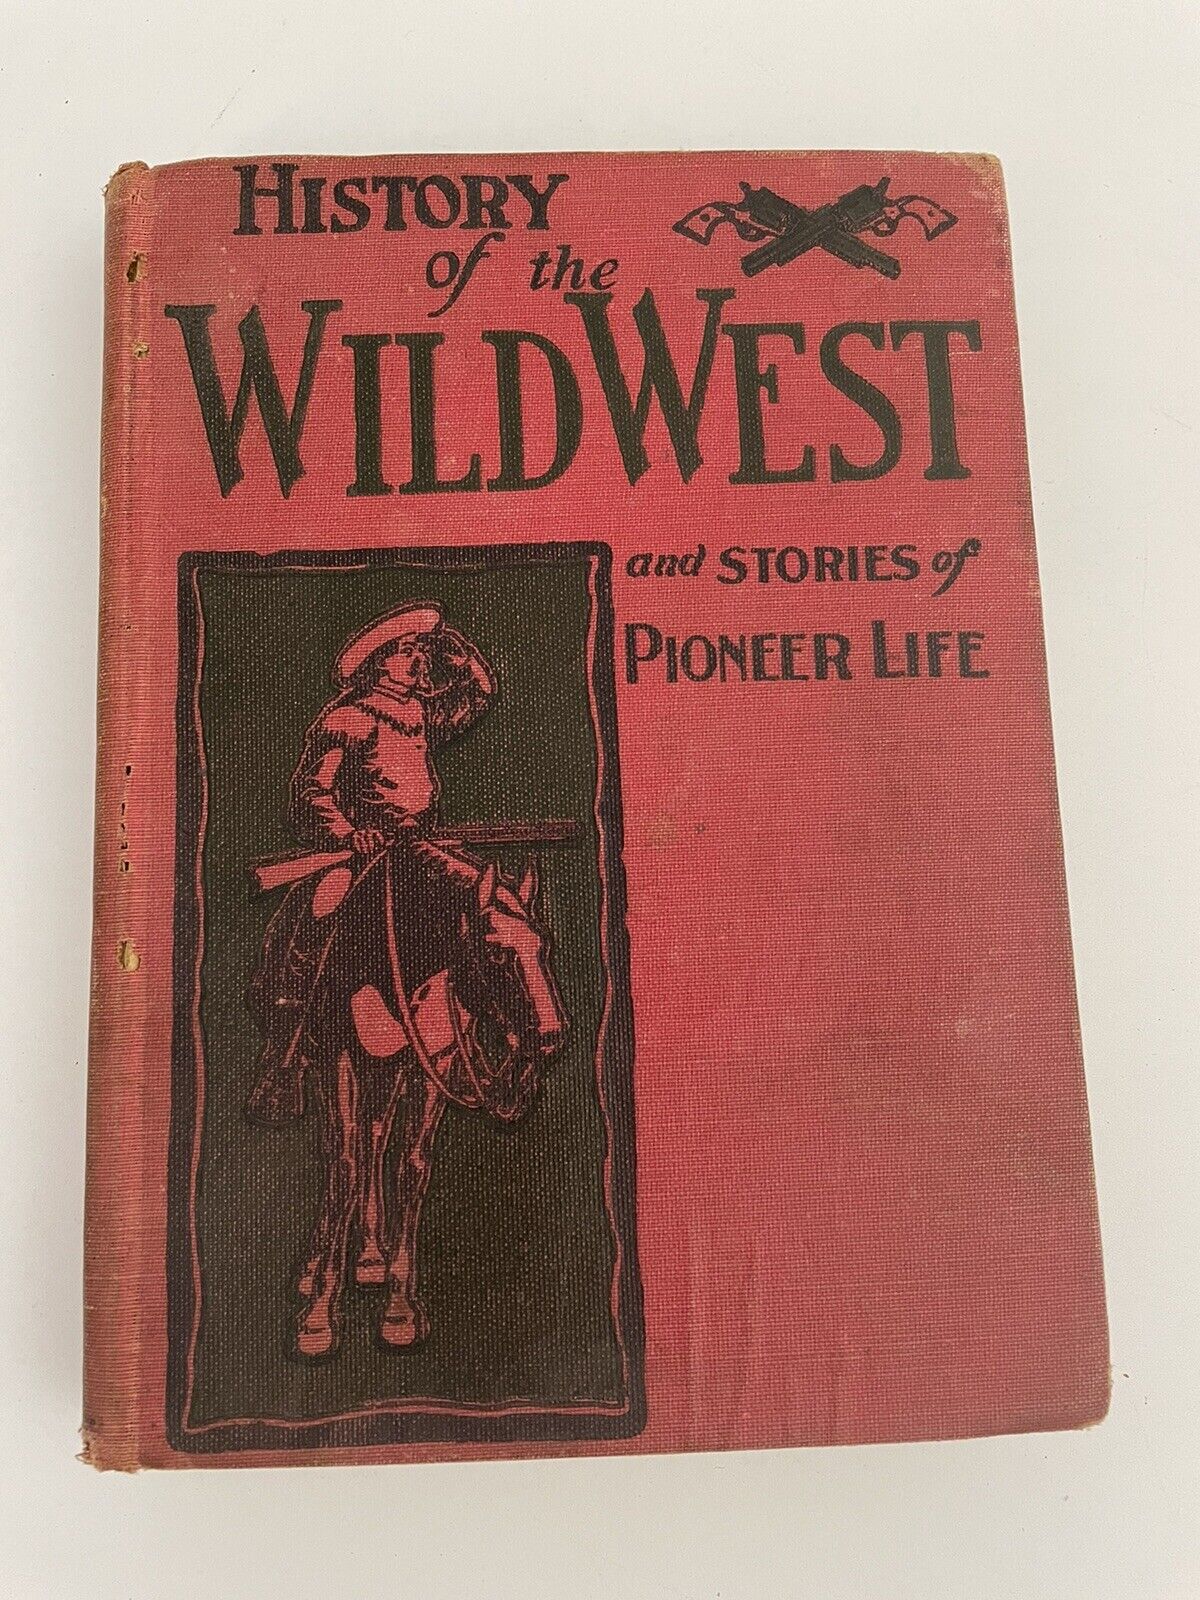 The History of the Wild West by Buffalo Bill - RARE Illustrated First Edition